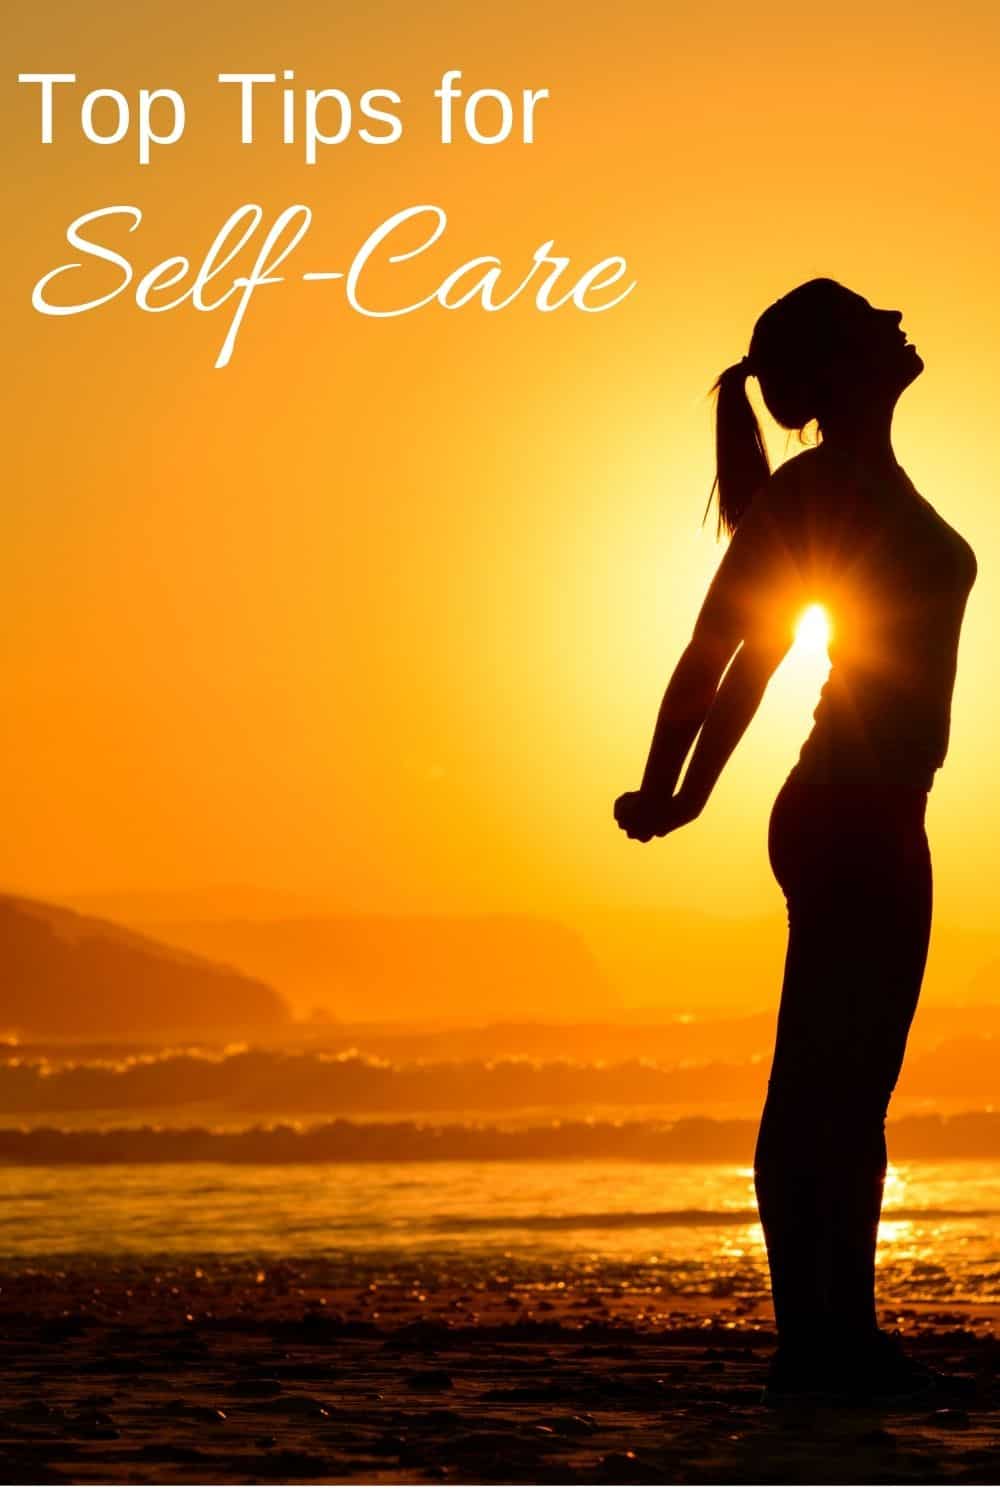 It may seem impossible to look and feel your best every day, but it is not out of your reach. You may even be so used to not functioning at 100% that you may not even notice how much your life could be improved. These self-care tips will help you live your best life.